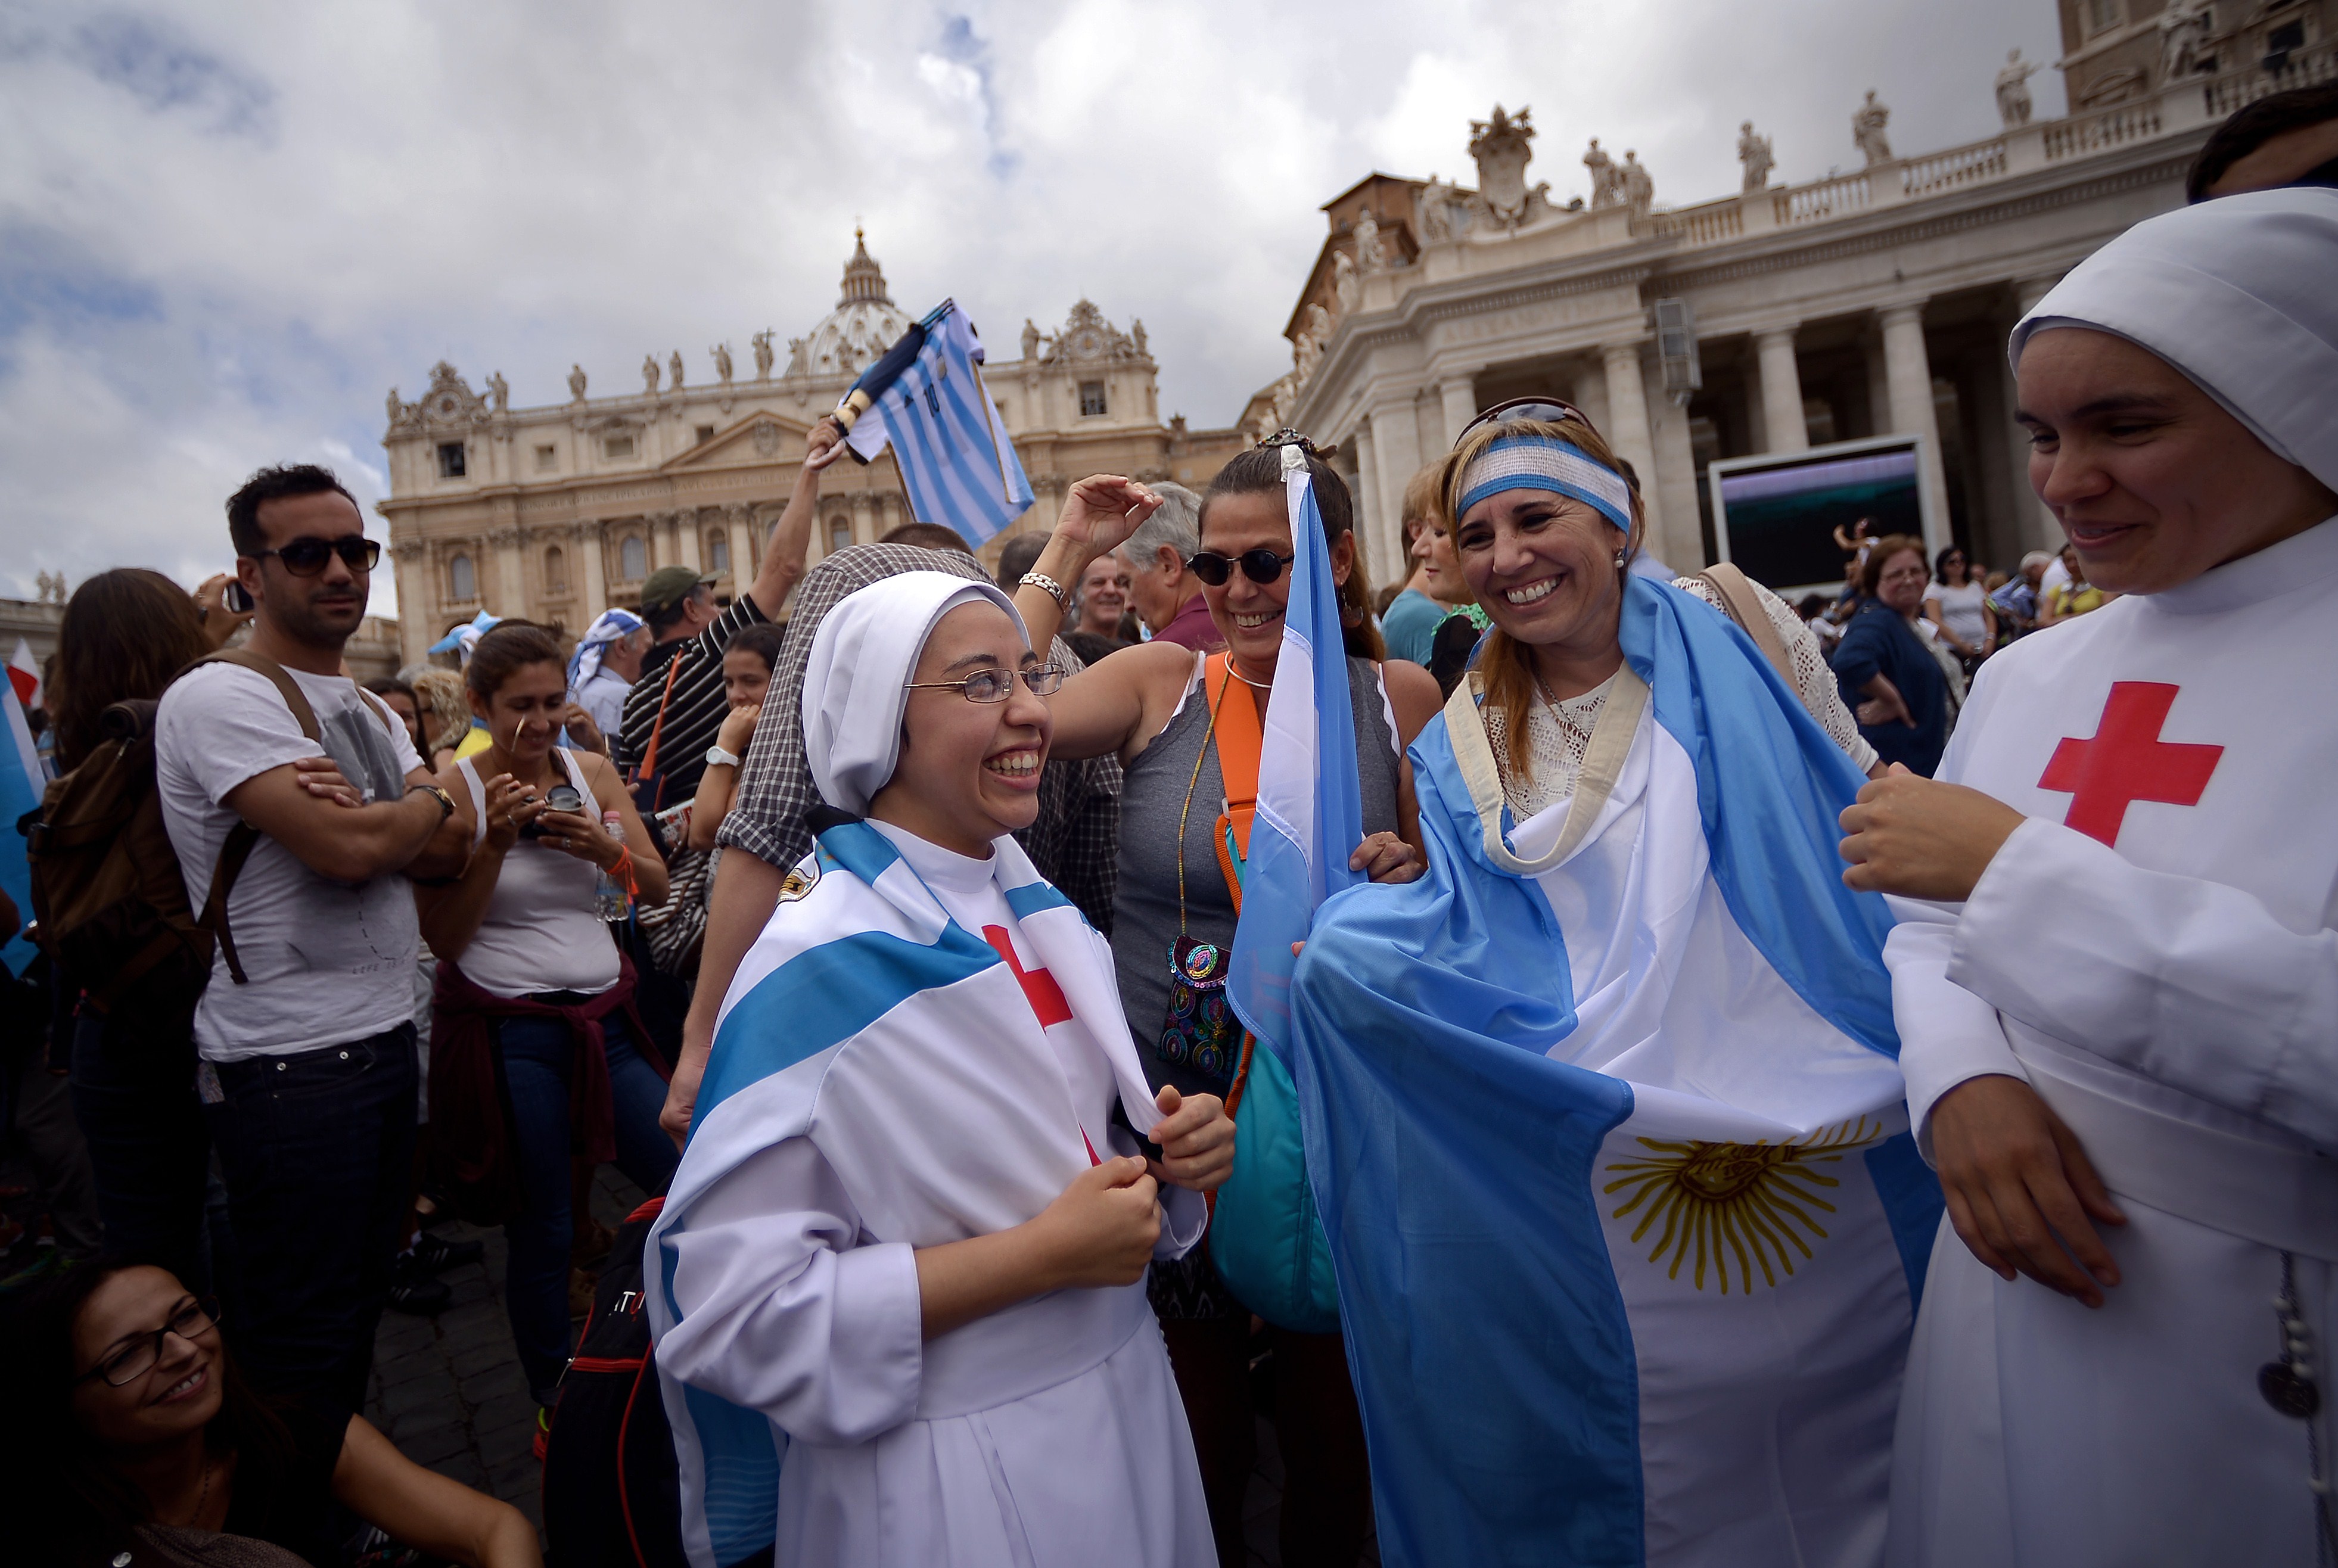 Nuns pose with the jersey of Argentinian football star Lionel Messi and flags prior Pope Francis Sunday Angelus prayer at St. Peter's Square on July 13, 2014 at the Vatican. (FILIPPO MONTEFORTE&mdash;AFP/Getty Images)